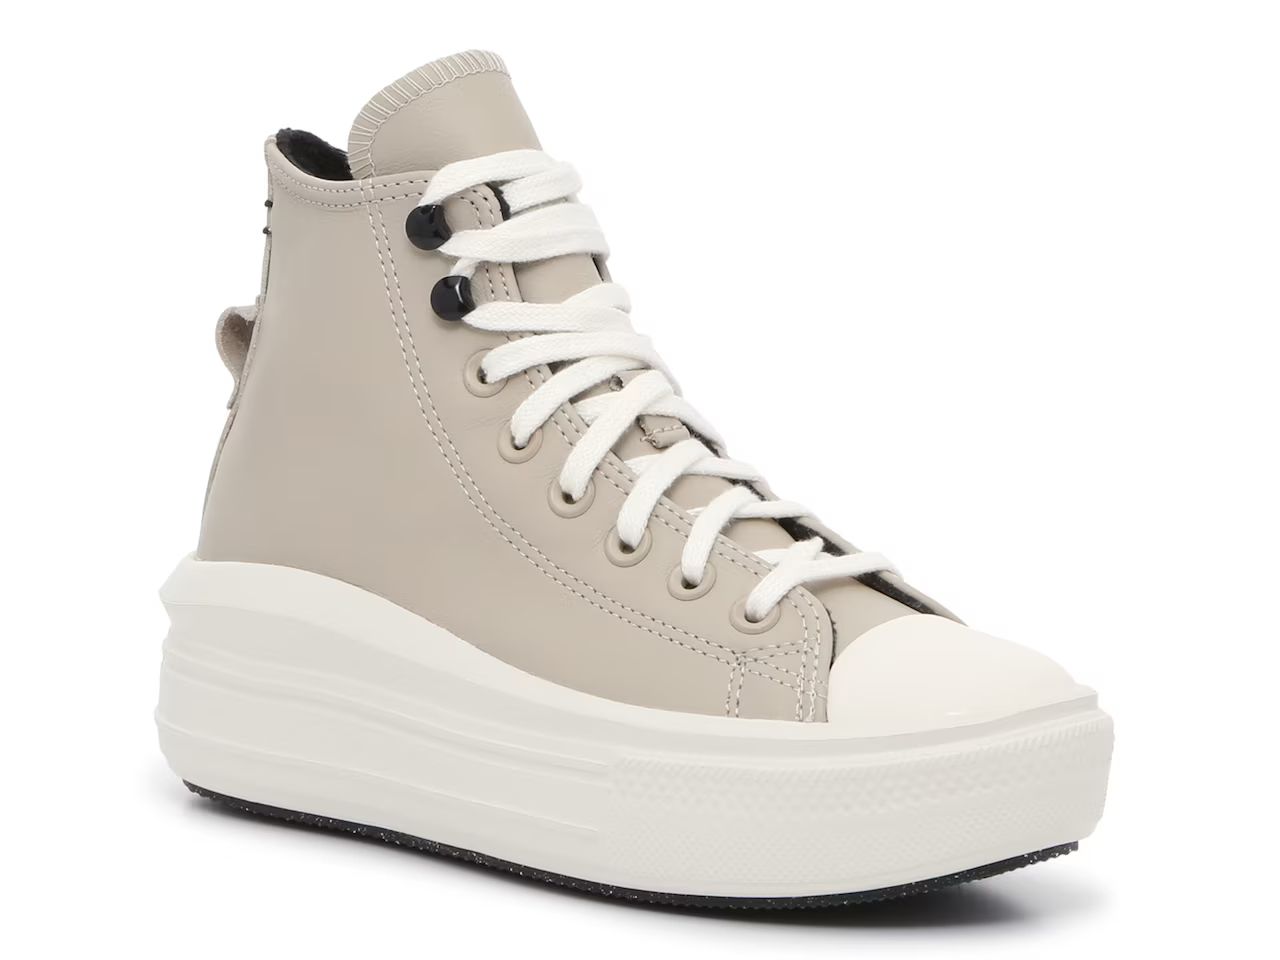 Converse Chuck Taylor All Star Move High-Top Sneaker - Women's | DSW